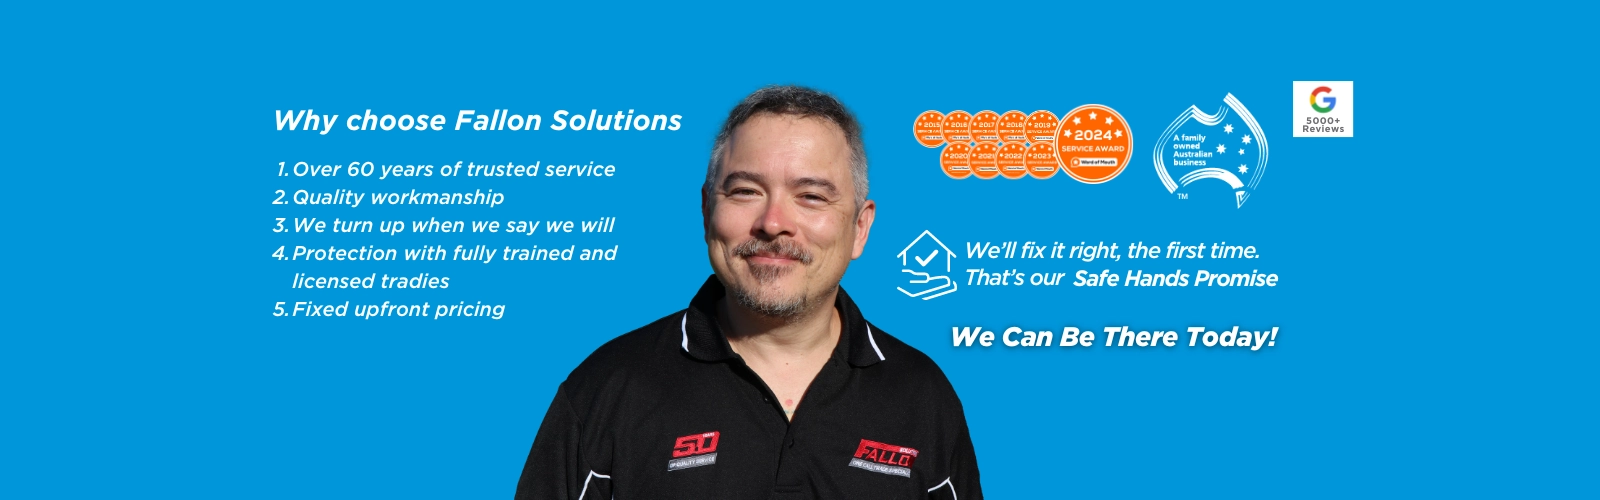 5 Reasons to choose Fallon Solutions 1600 x 500 px aws